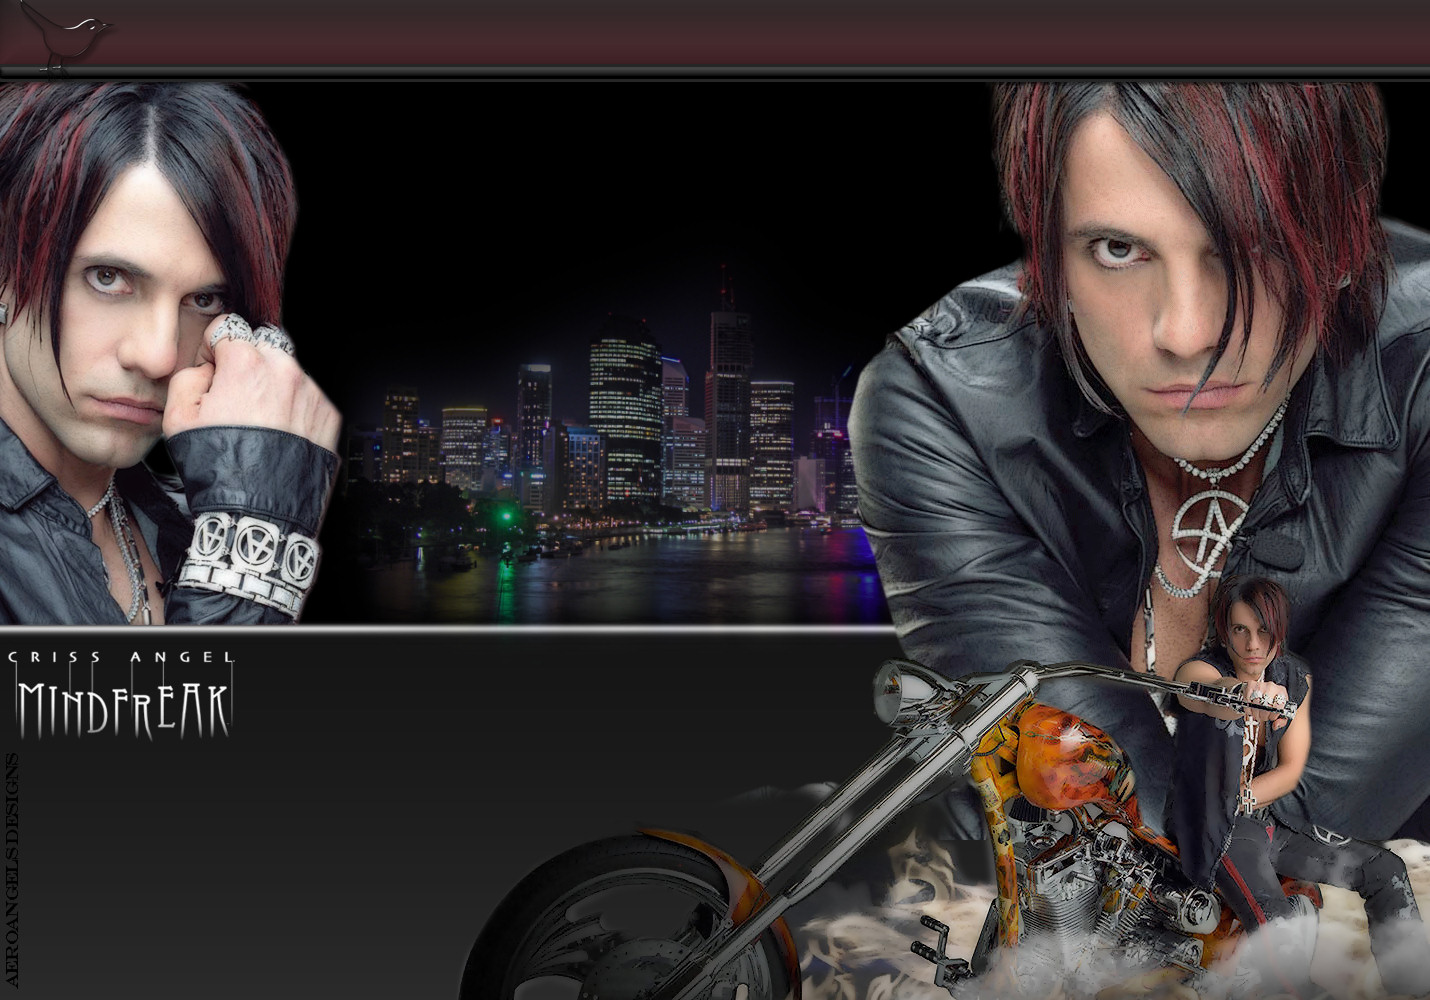 Criss Angel Background Themes